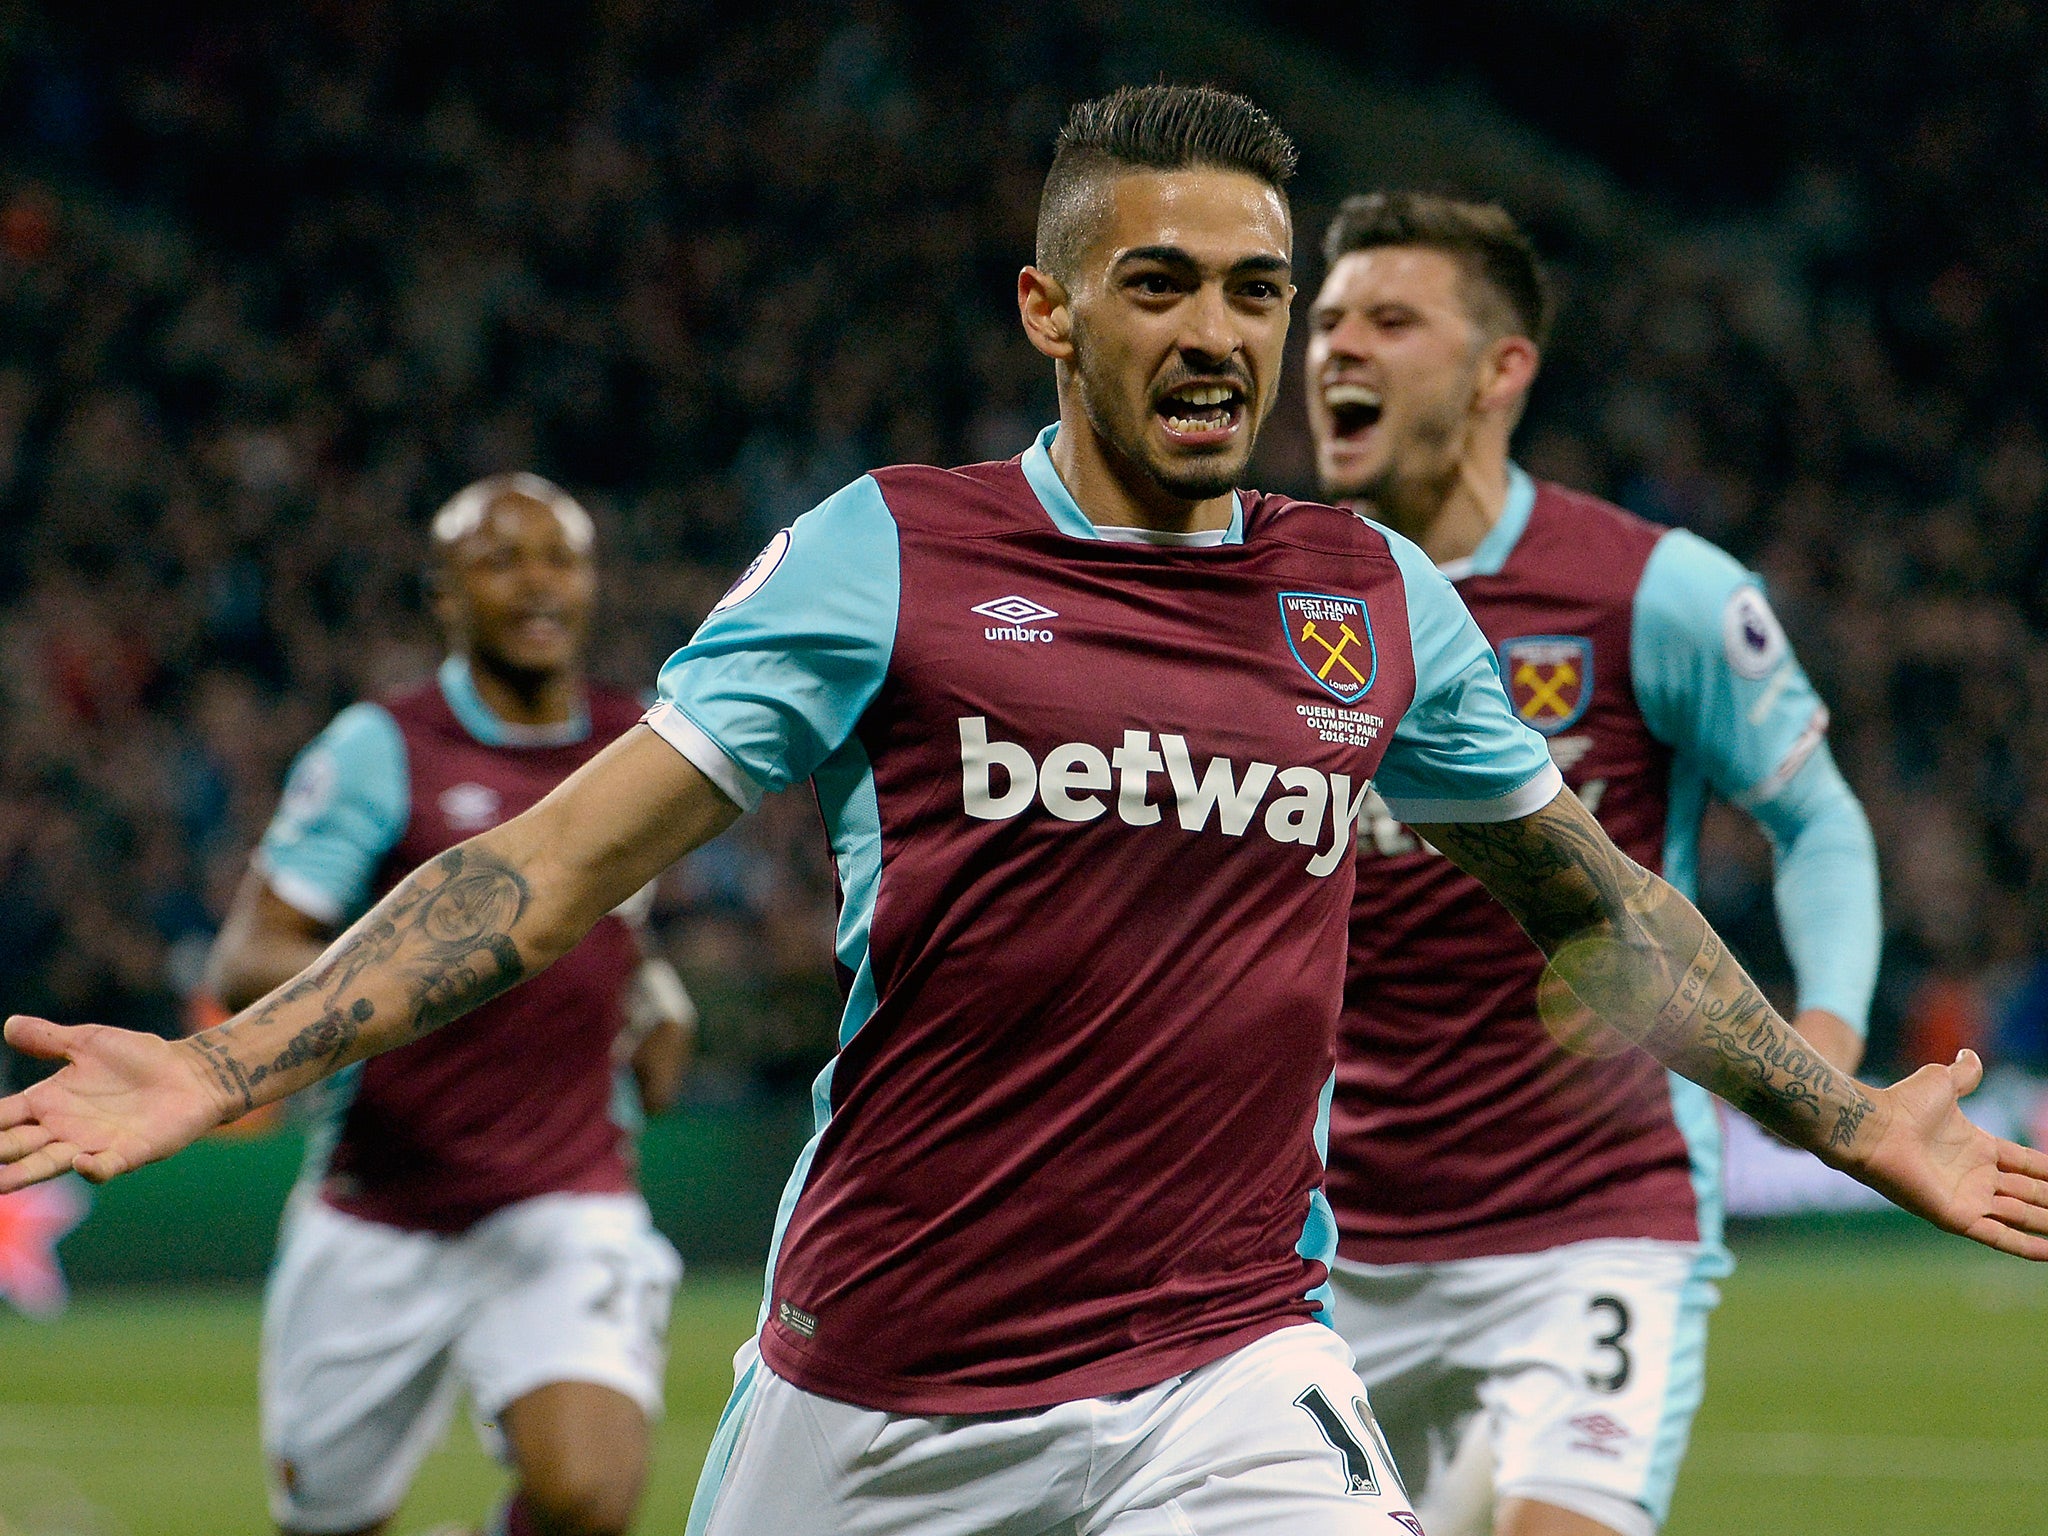 Manuel Lanzini's goal effectively ended Tottenham's title challenge and crowned Chelsea champions